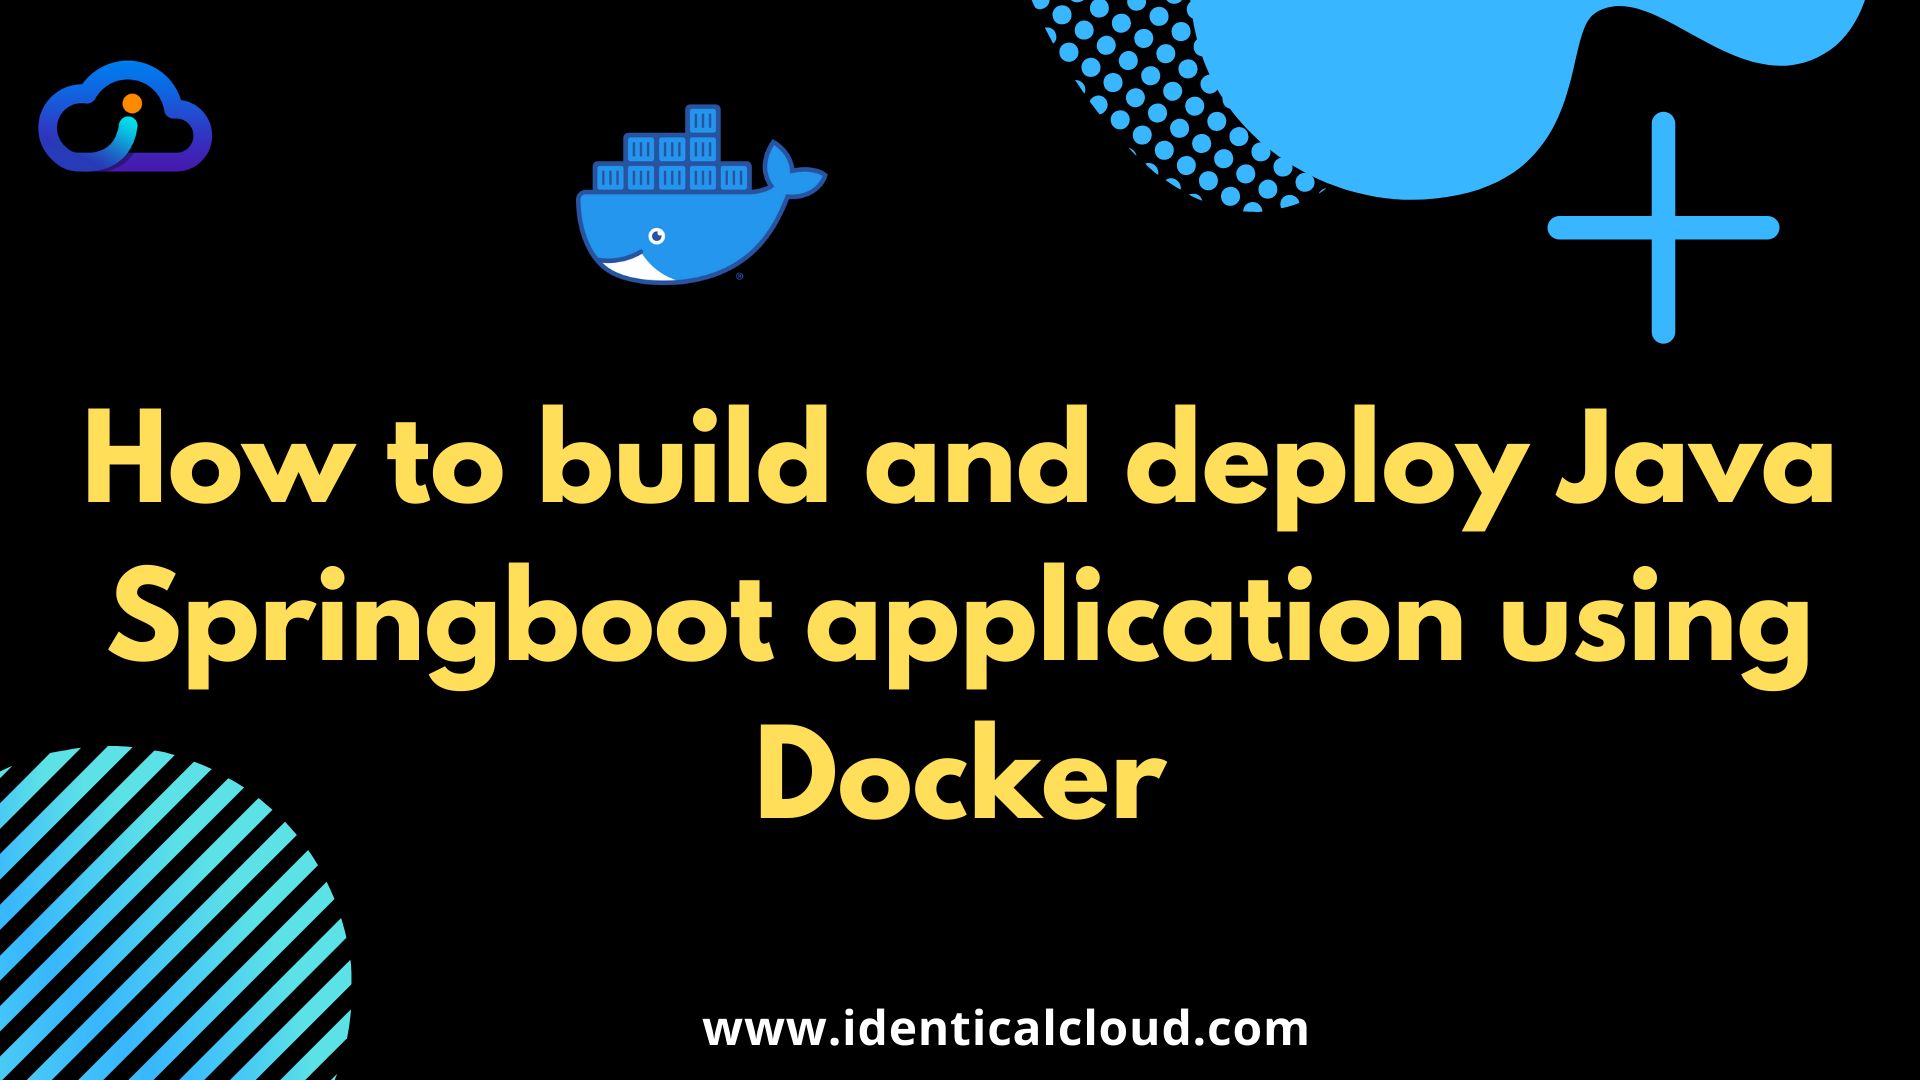 How to build and deploy Java Springboot application using Docker